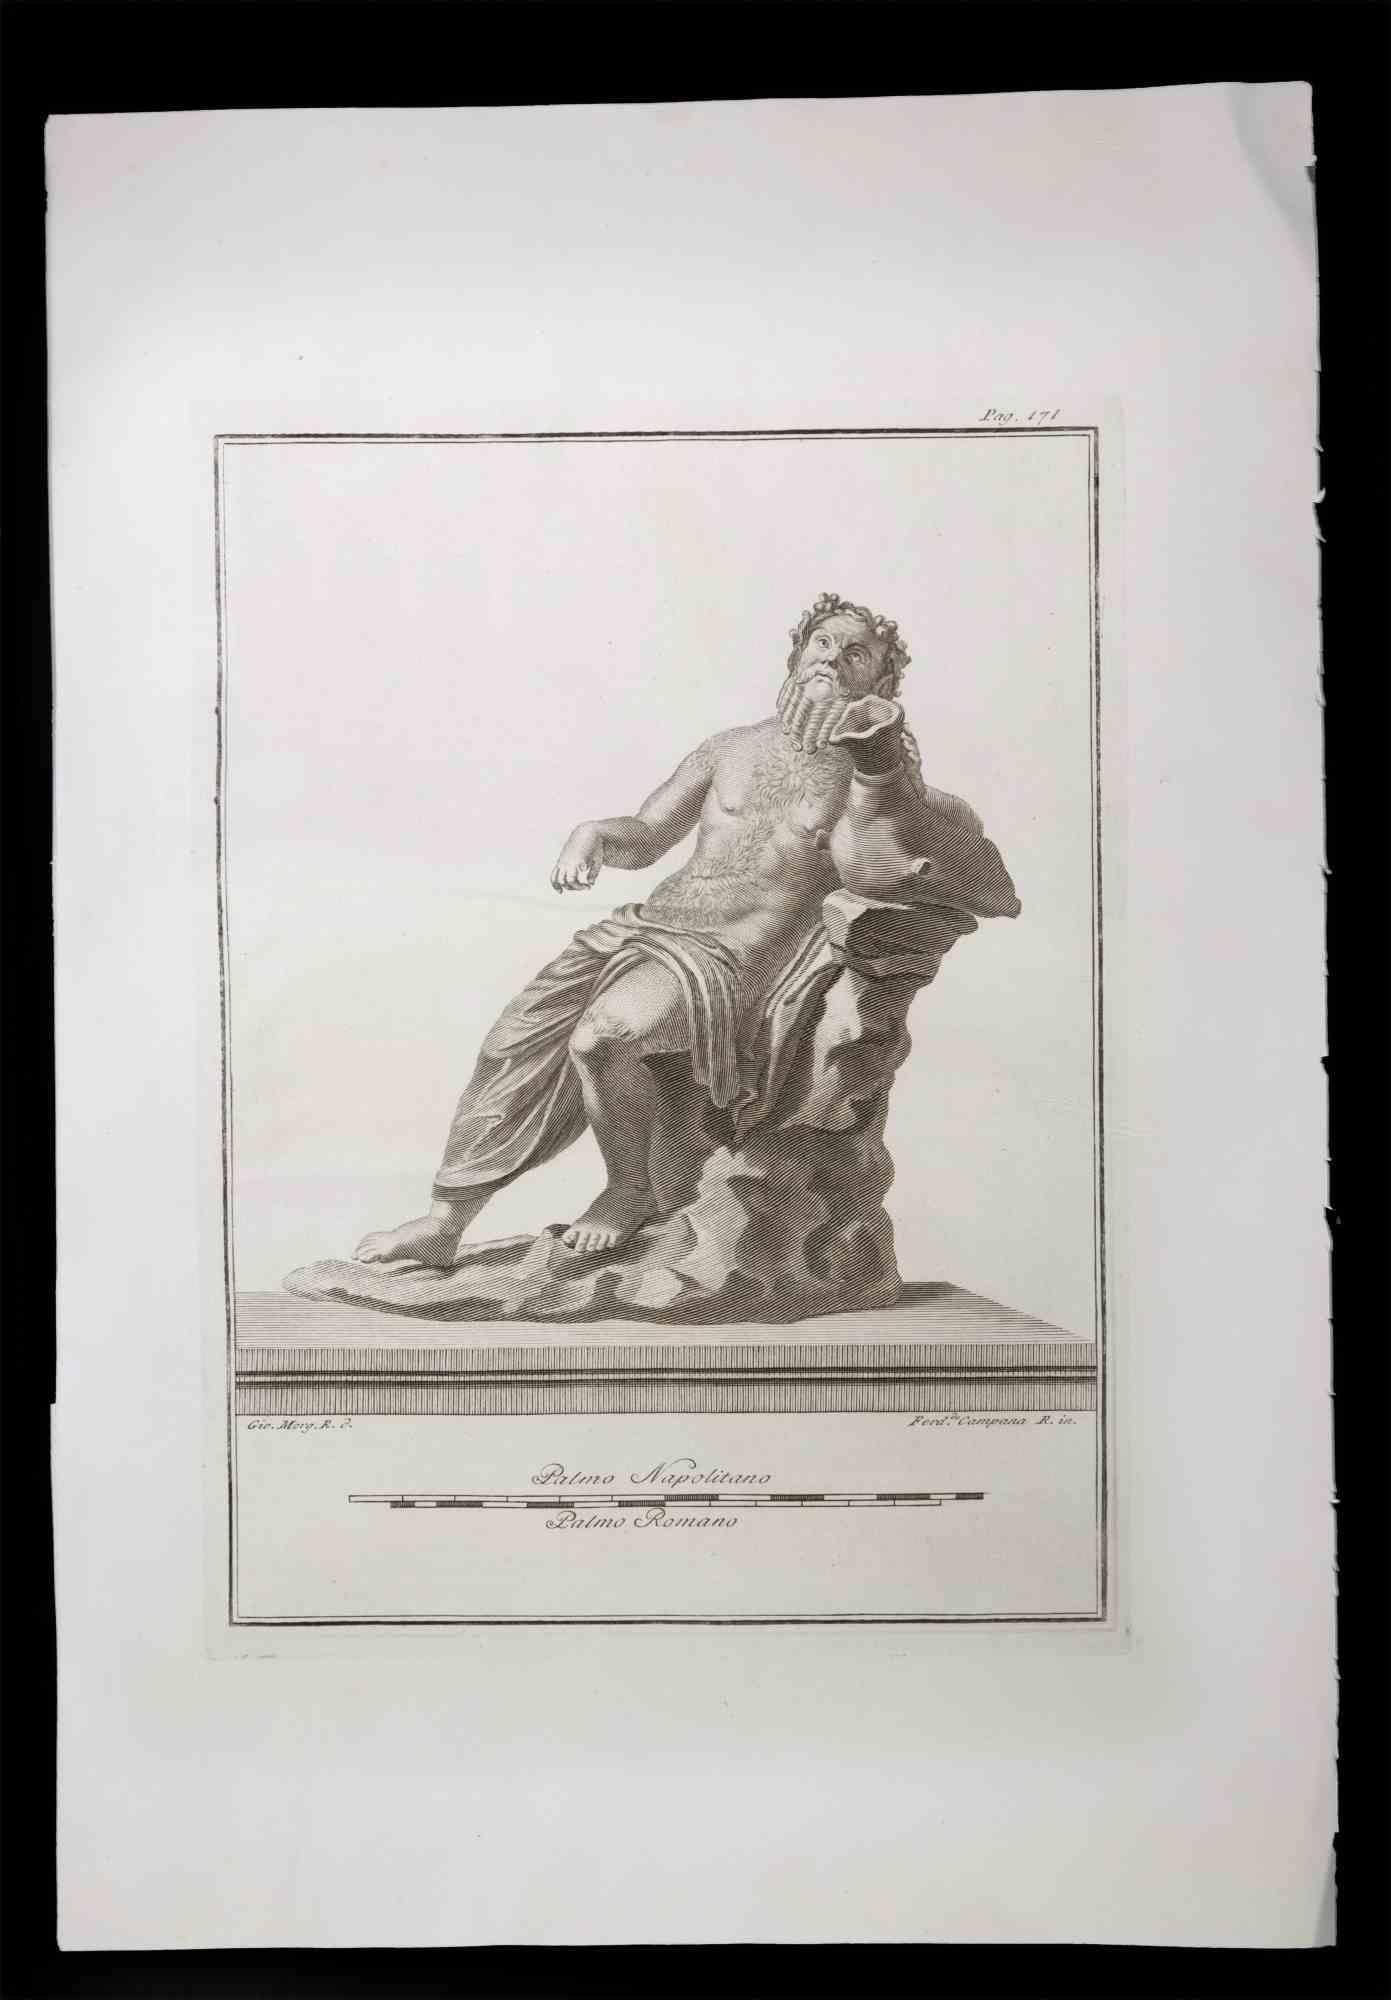 Dionysus, Ancient Roman Statue, from the series "Antiquities of Herculaneum", is an original etching on paper realized by Ferdinando Campana in the 18th Century.

Signed on the plate, on the lower right.

Good conditions with slight folding.

The